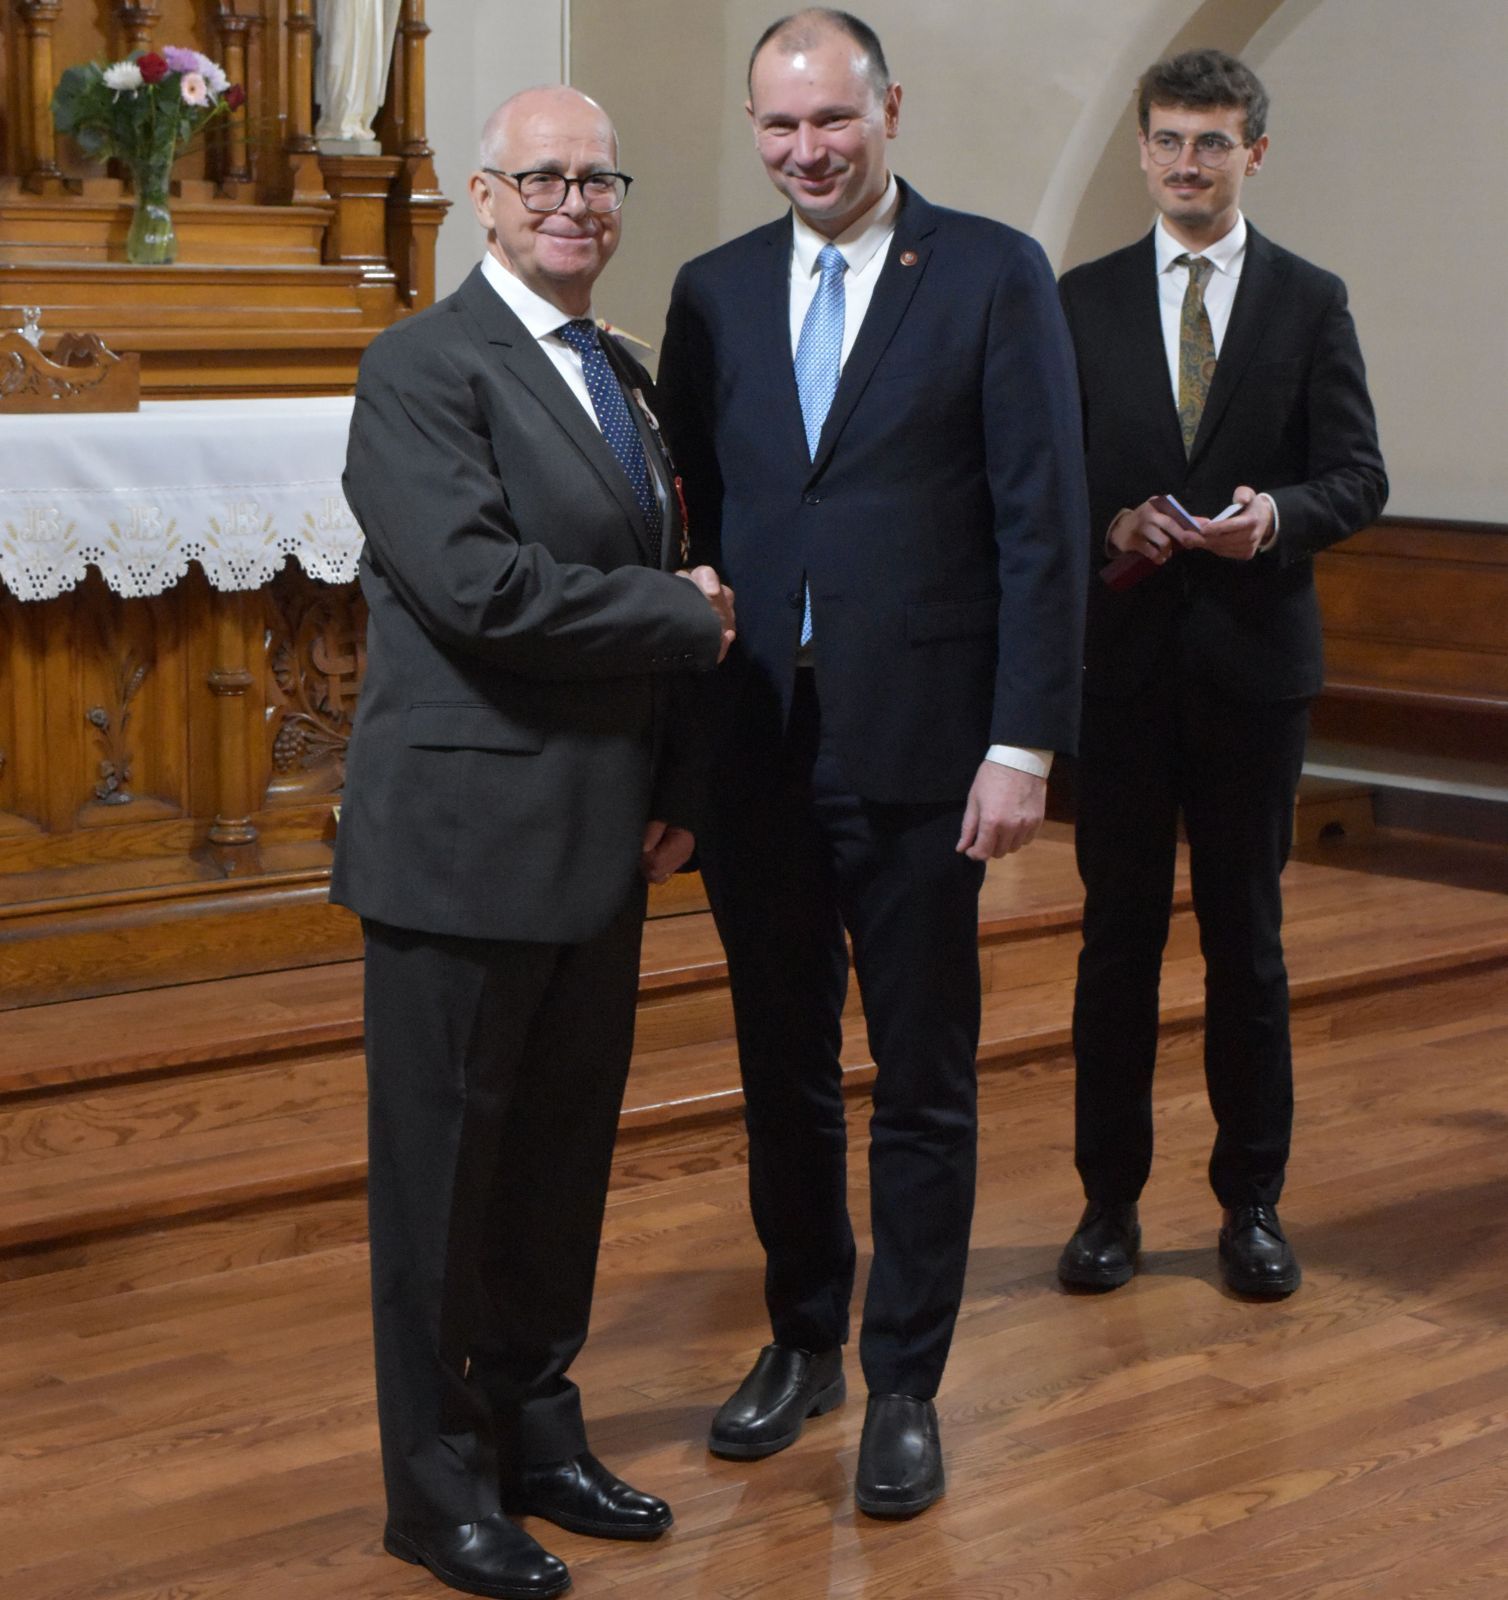 Gregory Jerkiewicz receiving The Cross of Freedom and Solidarity from the Polish Ambassador to Canada.